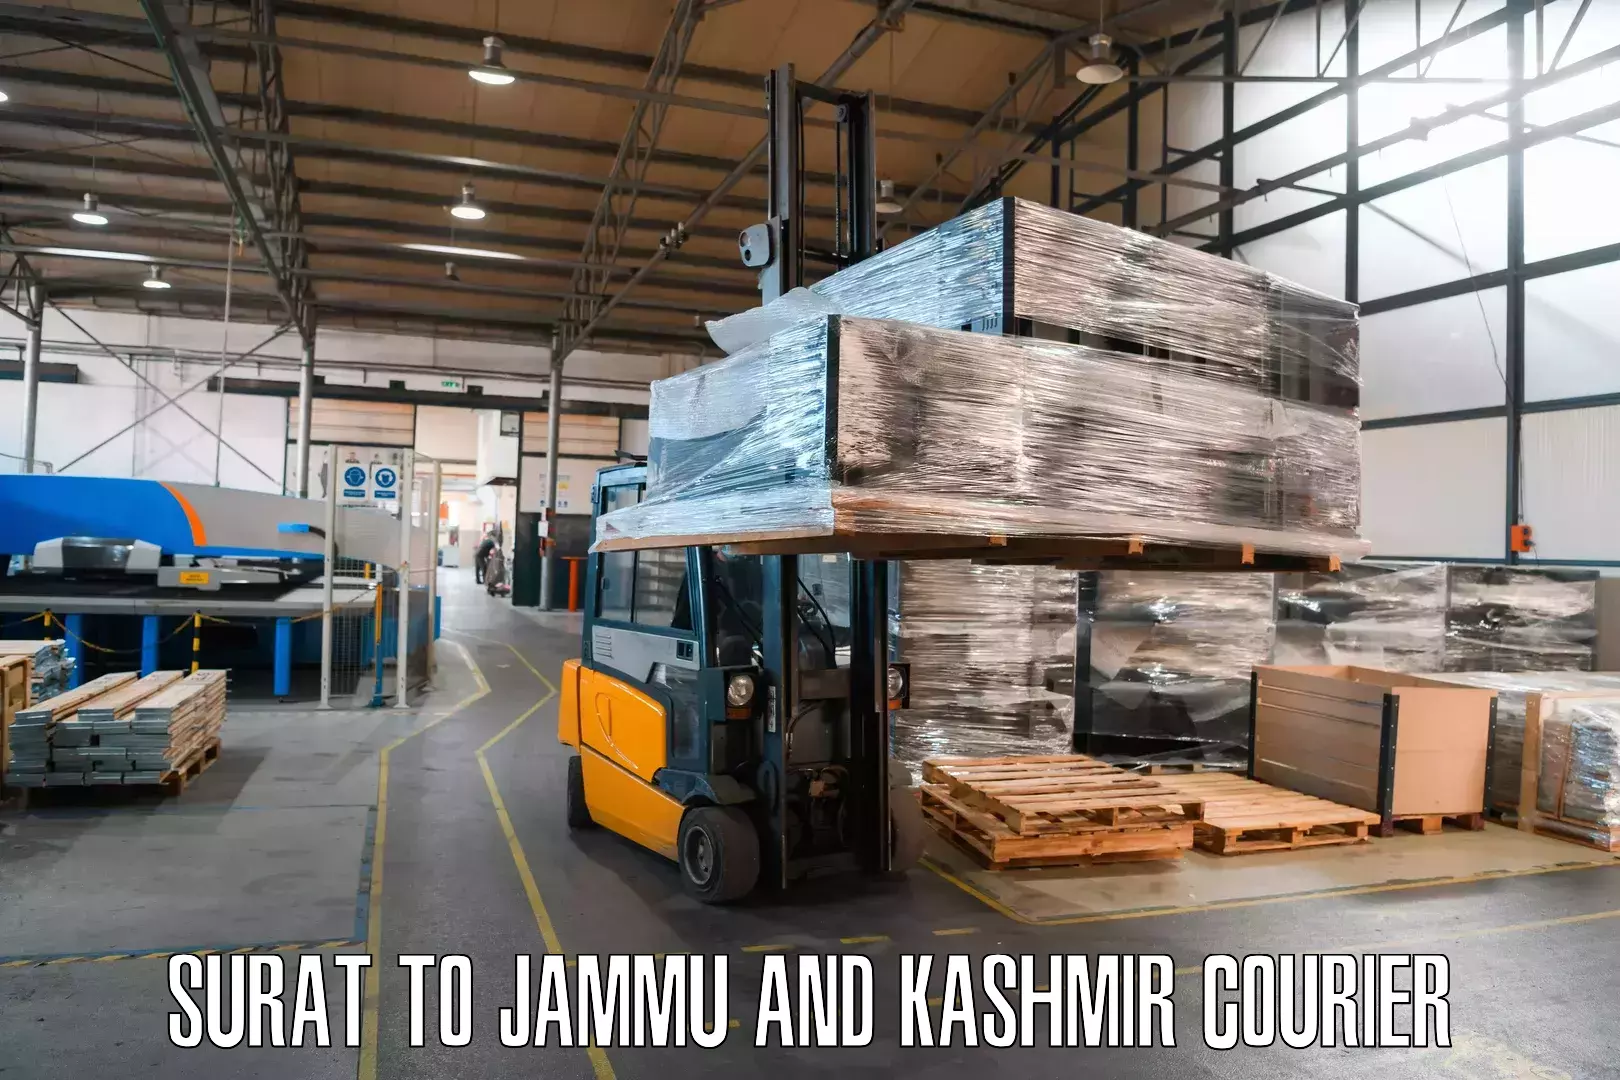 Global courier networks Surat to Jammu and Kashmir